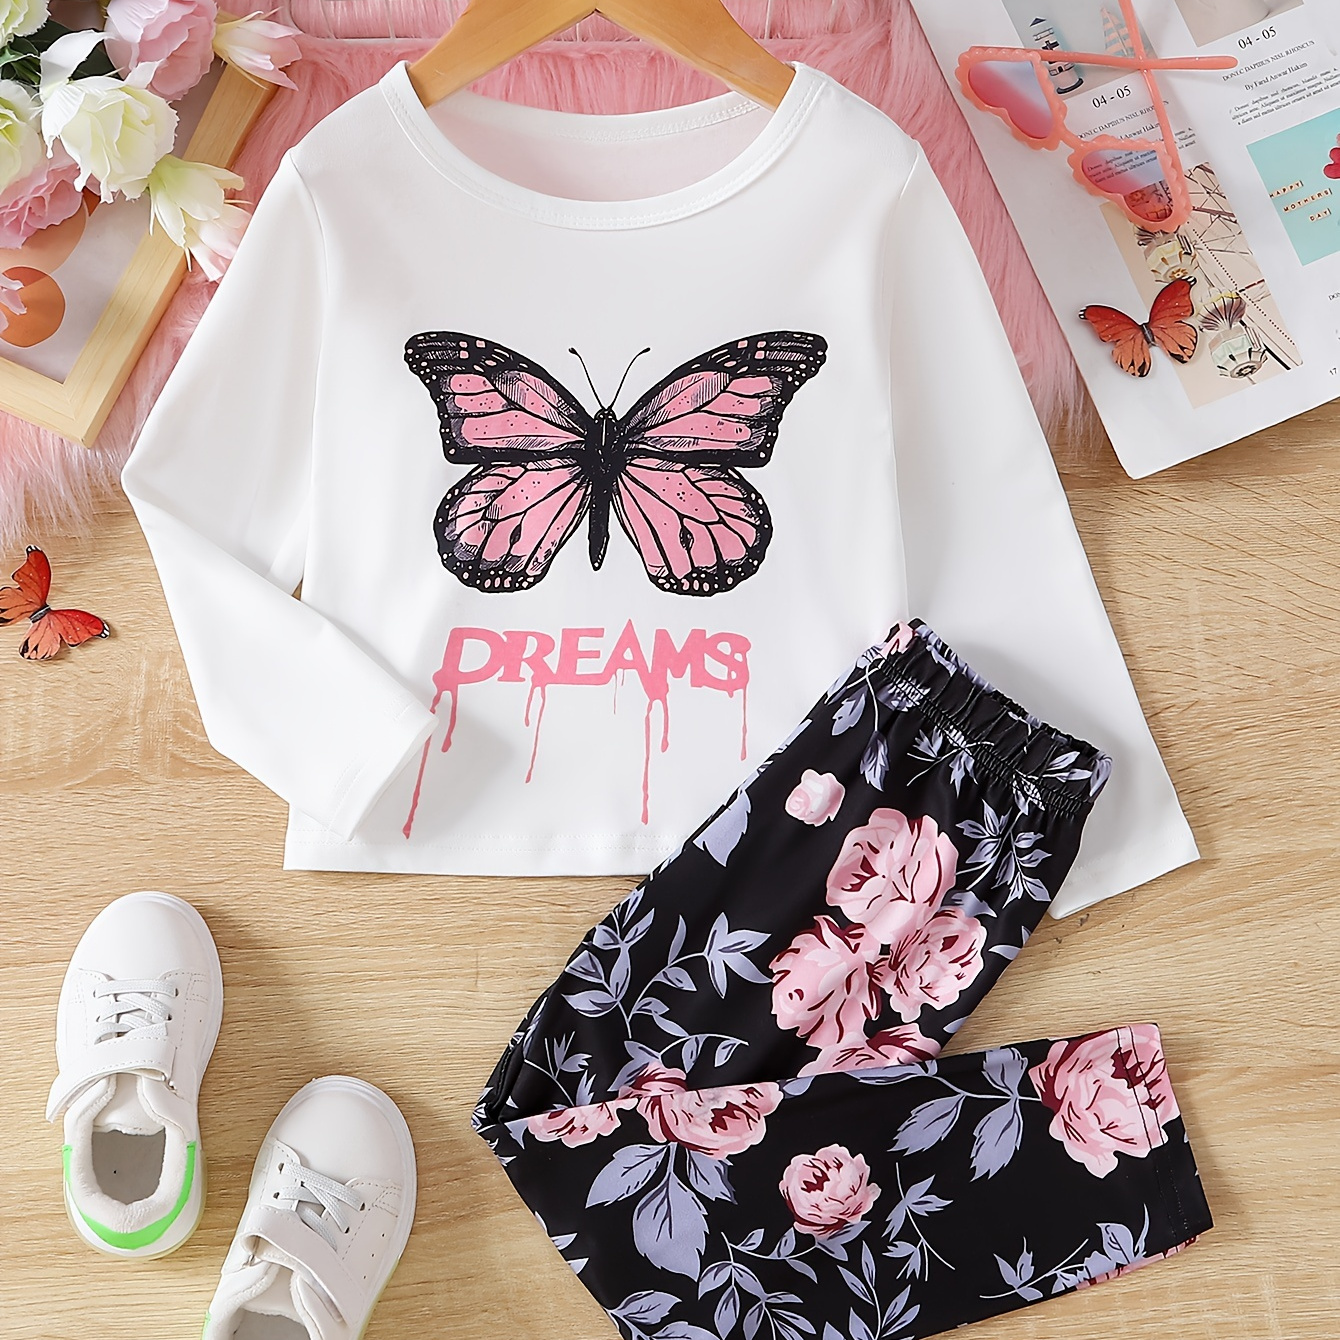 

Girl's Butterfly Graphic Outfit 2pcs, Long Sleeve Top & Floral Pattern Pants Set, Dreams Print Kid's Clothes For Spring Fall